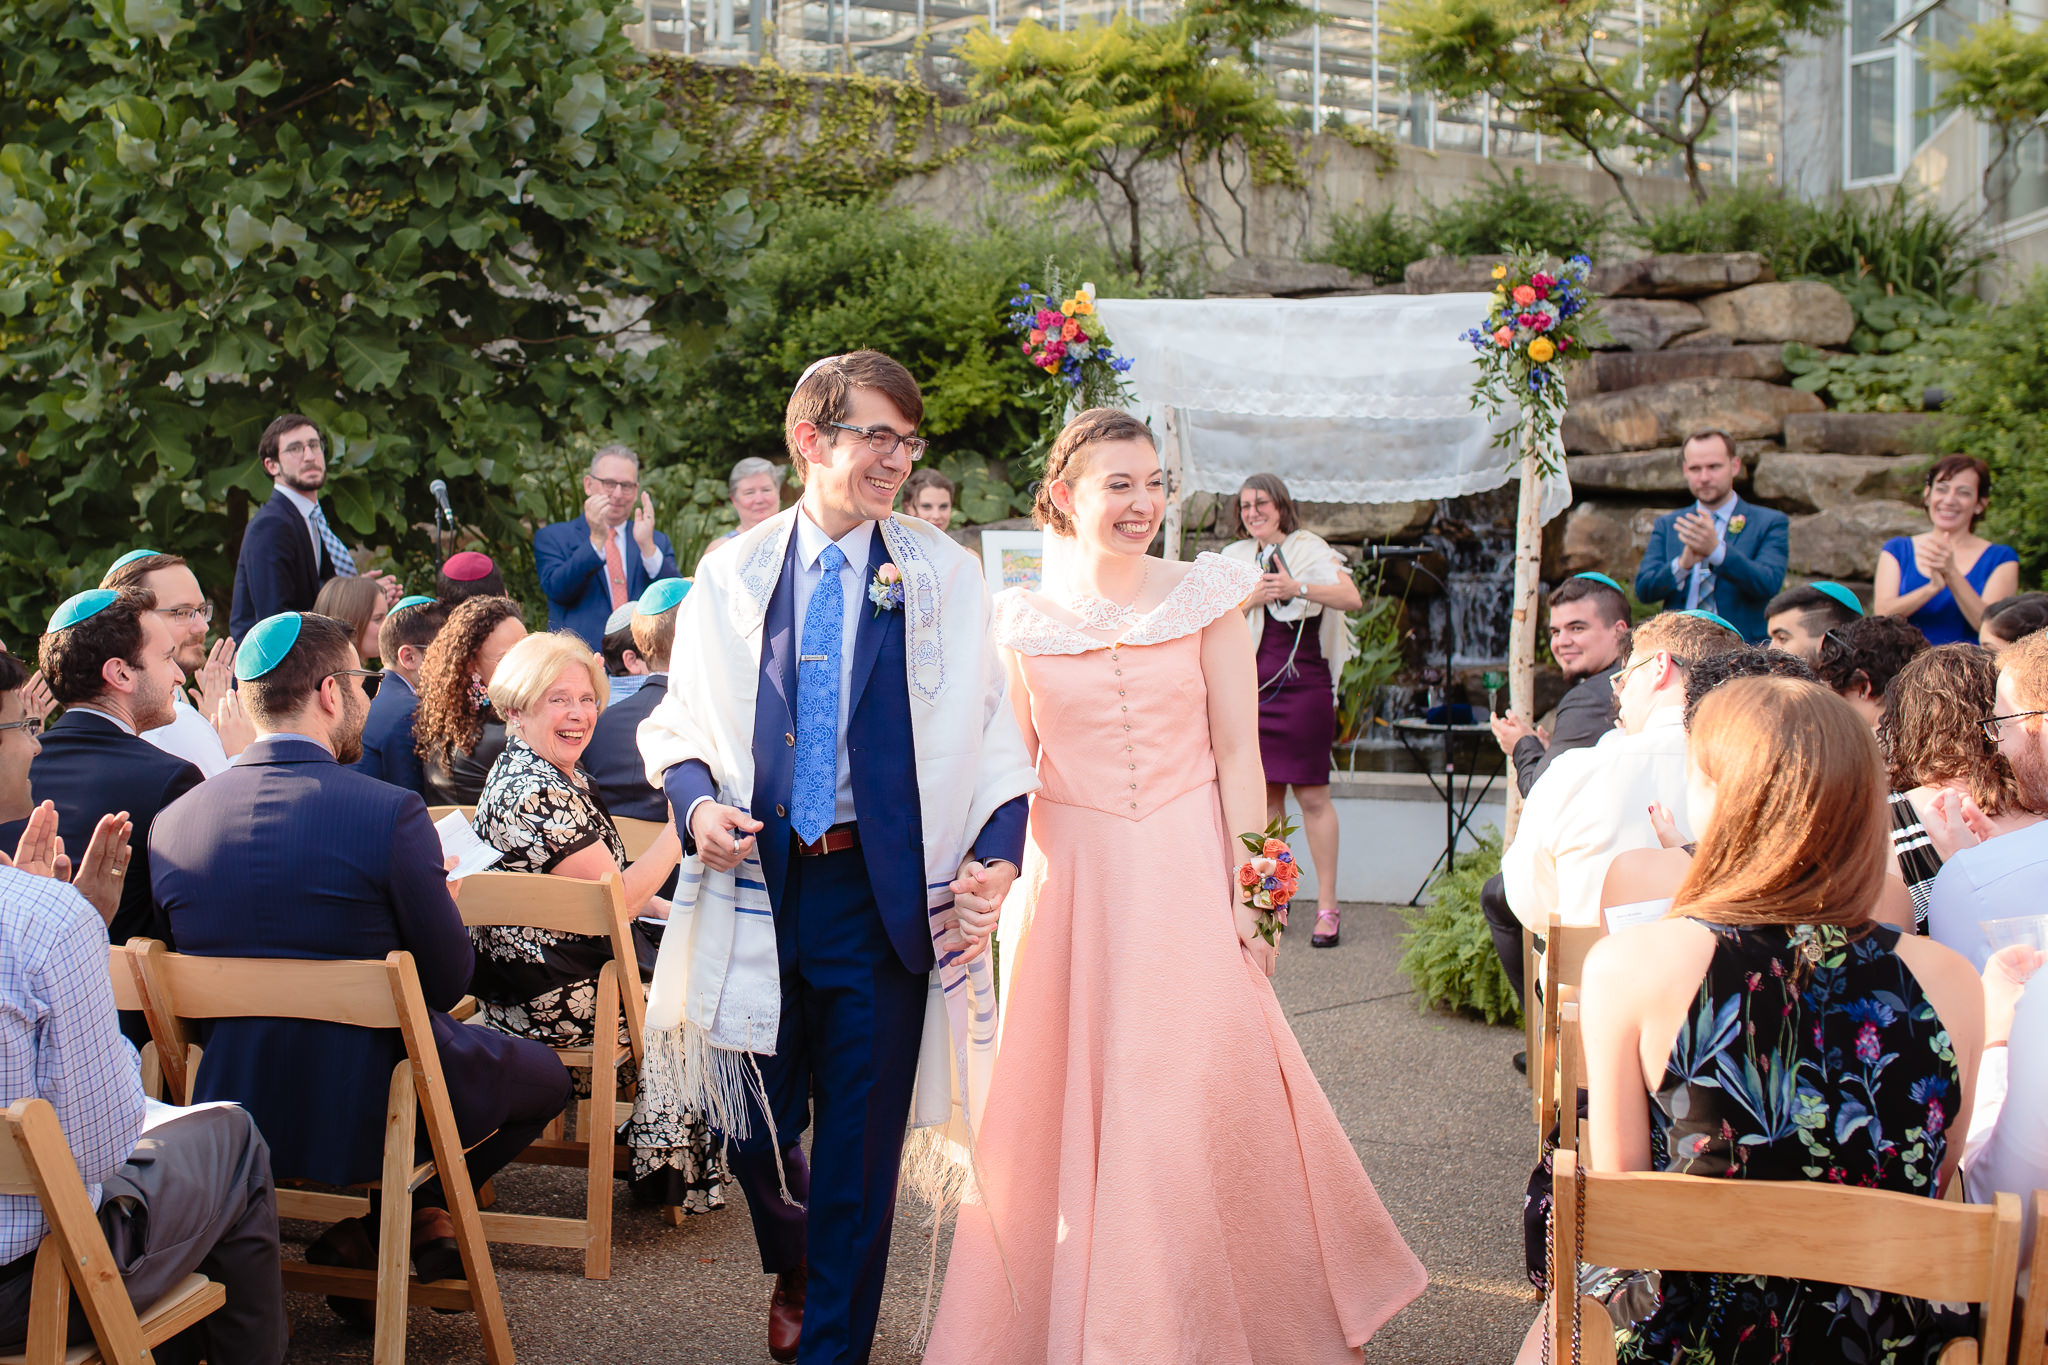 Newlyweds exit their outdoor Jewish wedding ceremony at Phipps Conservatory